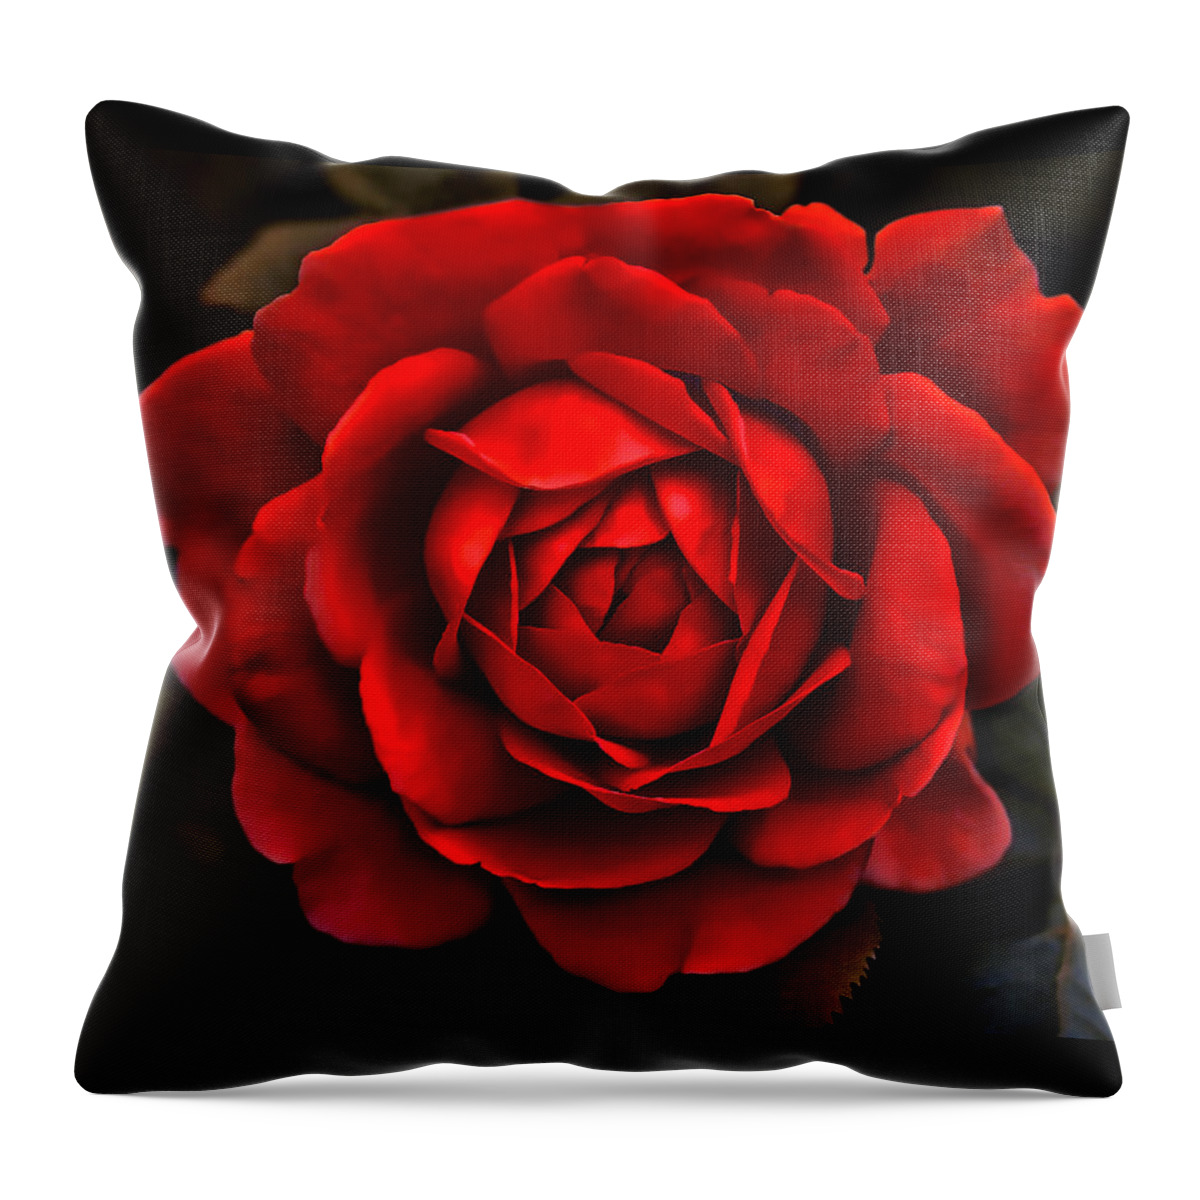 Rose Throw Pillow featuring the photograph Red Red Rose Flower by Jennie Marie Schell